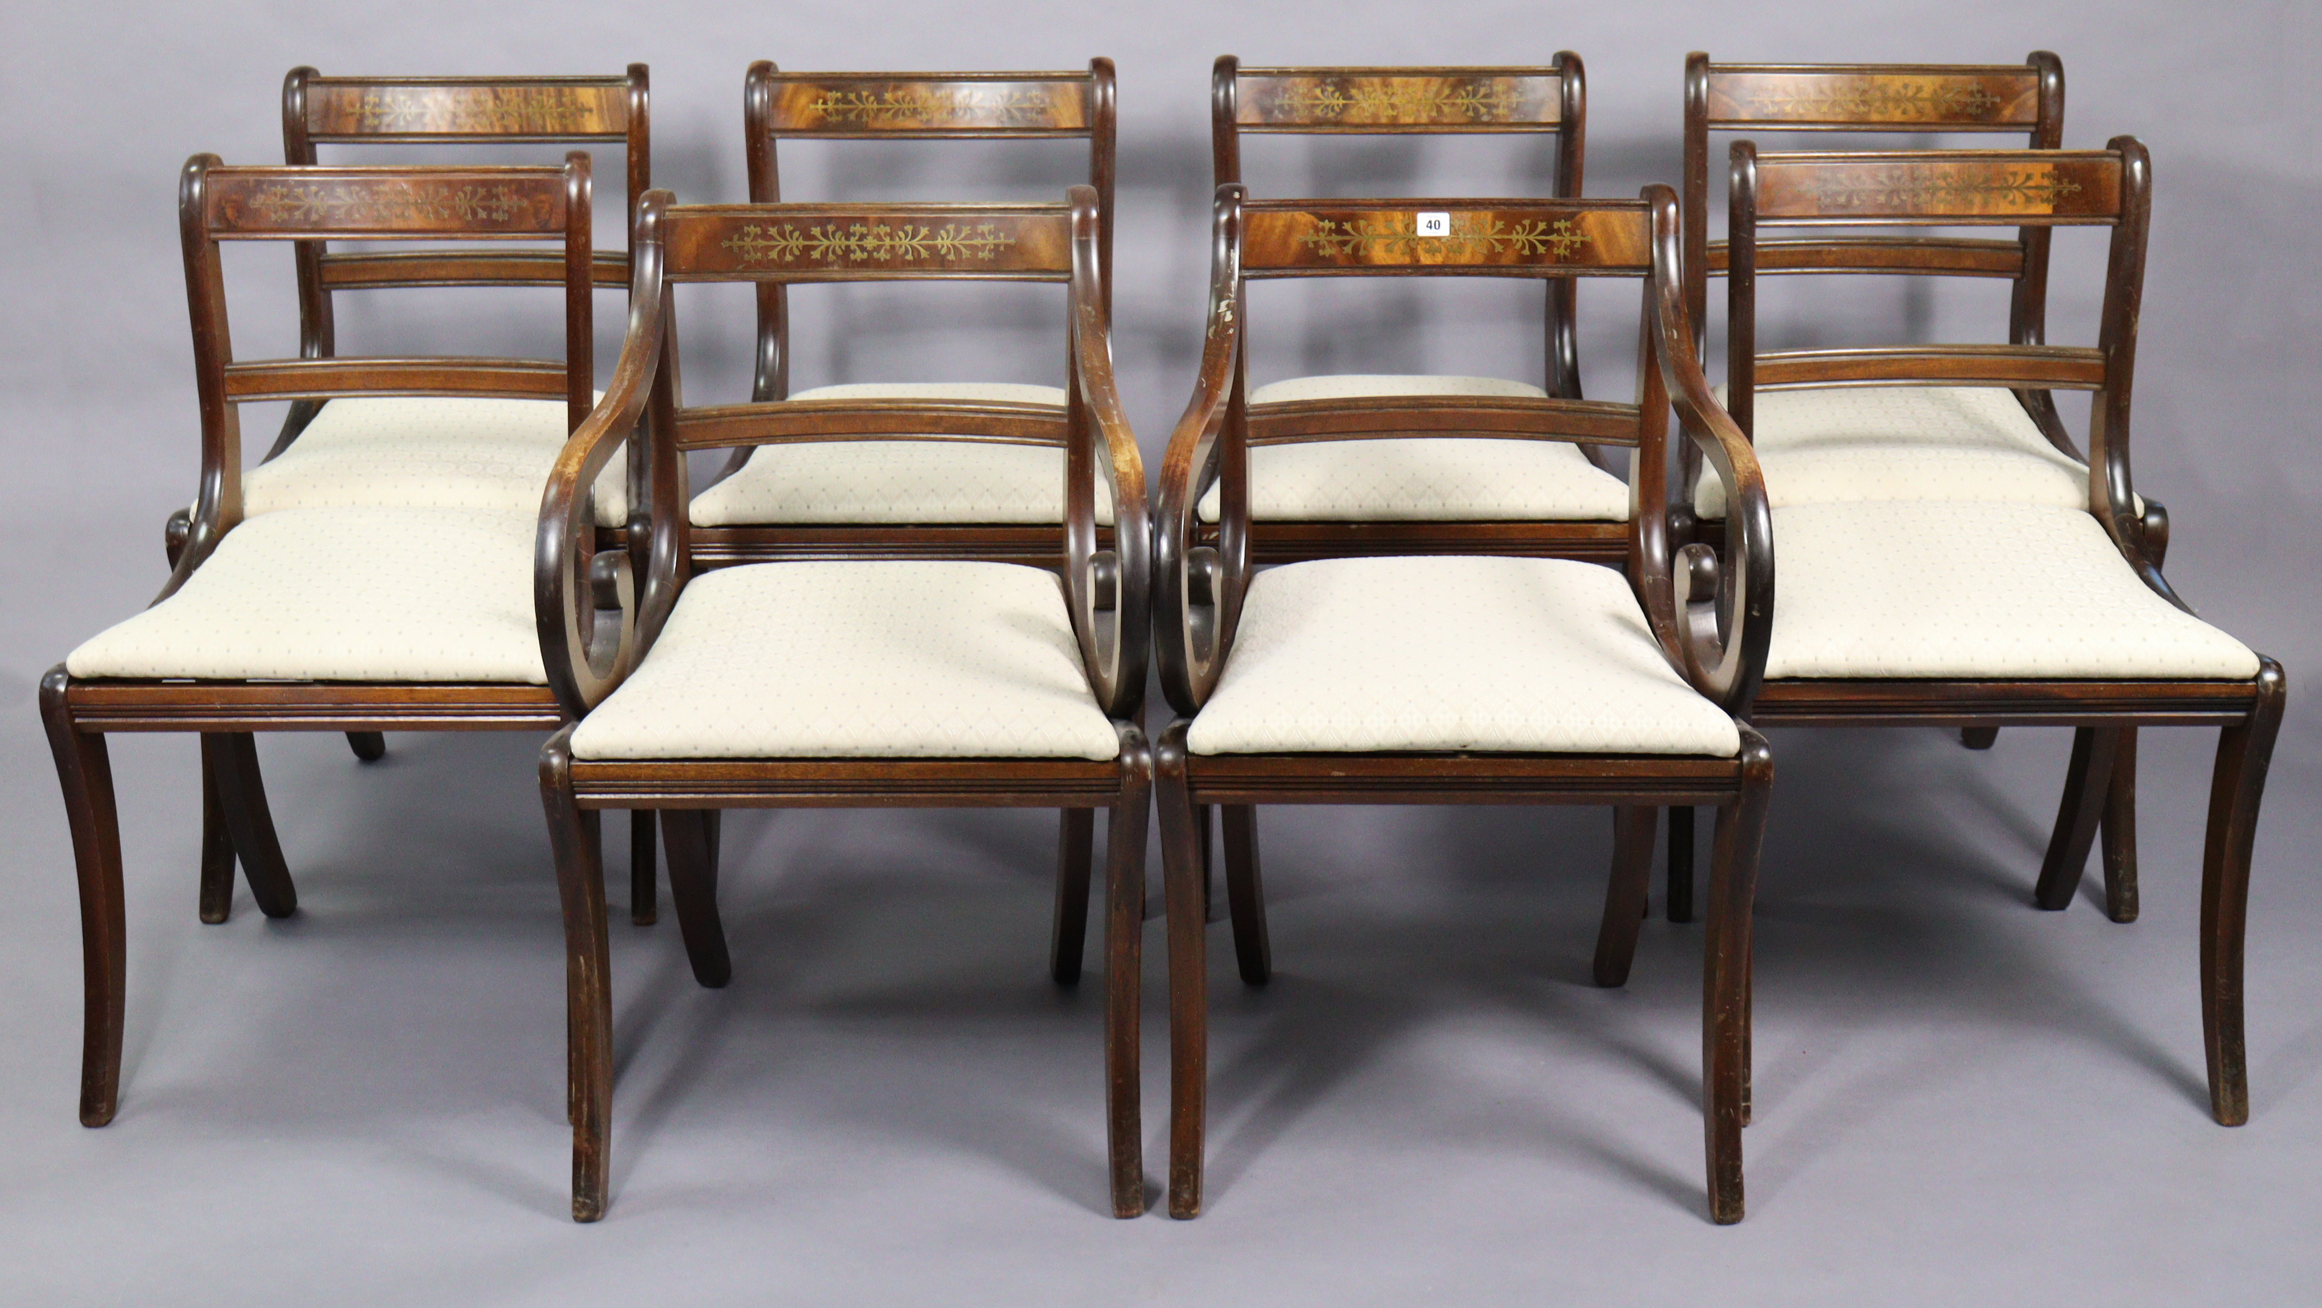 A set of eight regency-style brass-inlaid bow-back dining chairs (including a pair of carvers), with